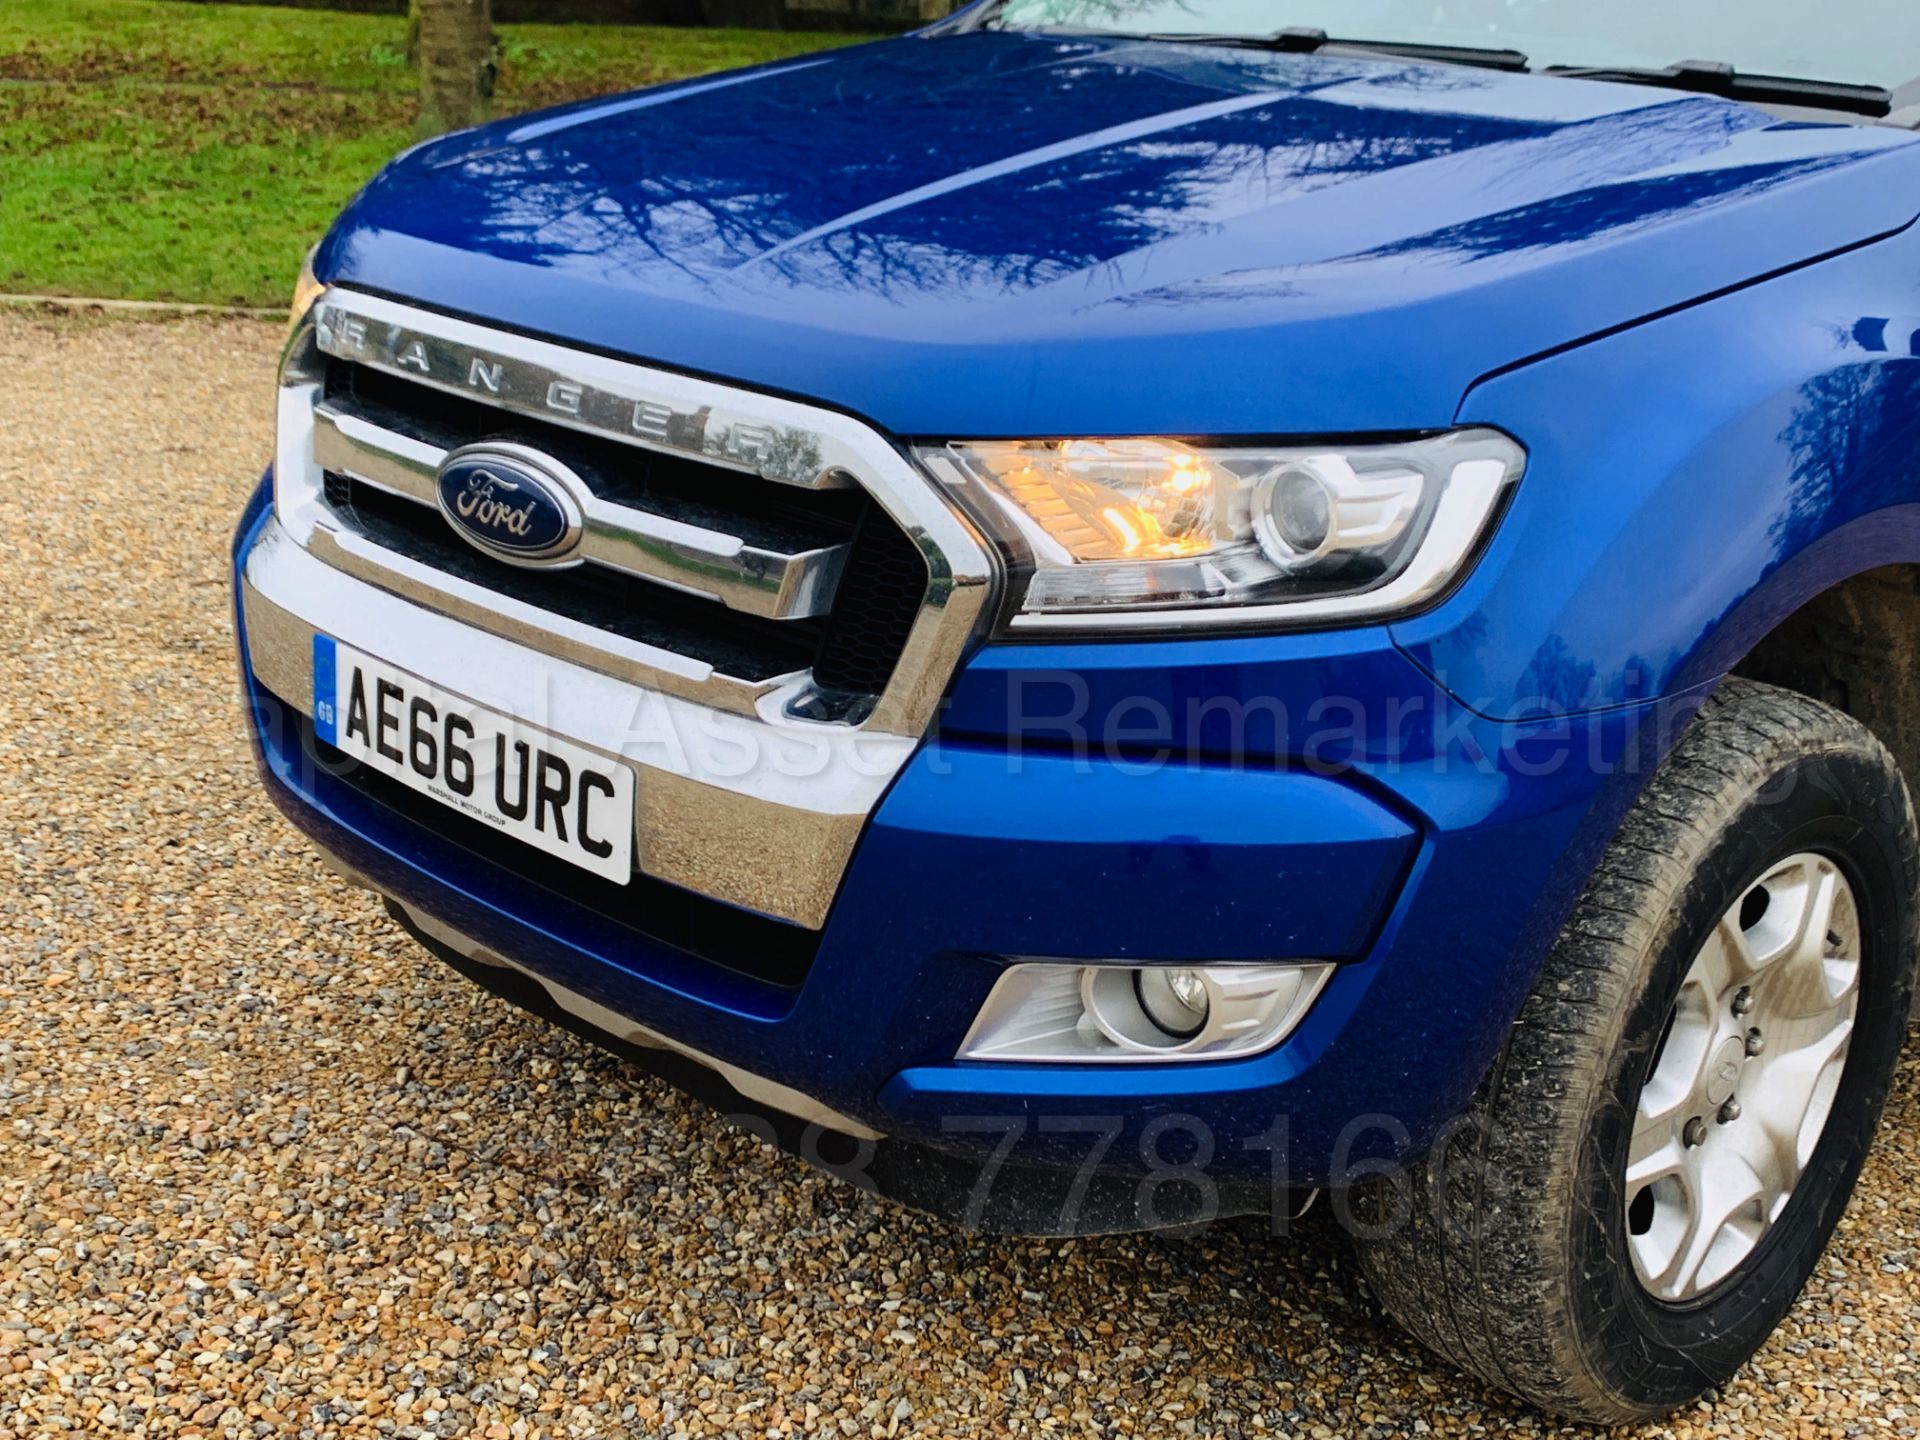 (On Sale) FORD RANGER *LIMITED* D/CAB PICK-UP (66 REG) '3.2 TDCI - 200 BHP - AUTO - LEATHER - NAV' - Image 15 of 58